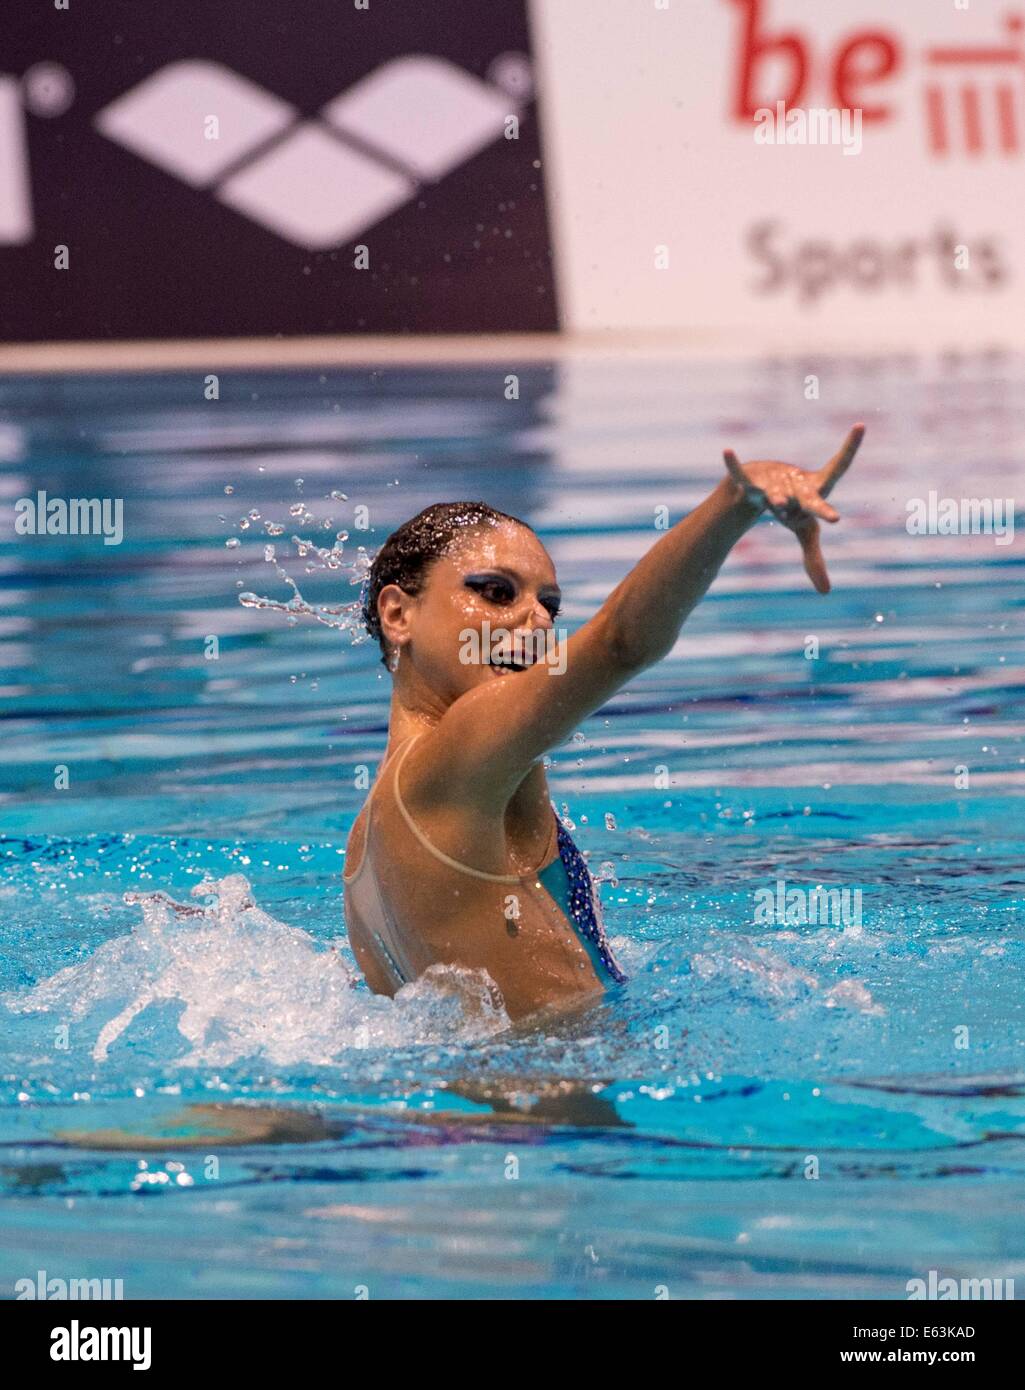 Berlin, Germany. 13th Aug, 2014. CERRUTI Linda ITA Italy SOLO preliminary round 32nd LEN European Championships Synchro Credit:  Action Plus Sports/Alamy Live News Stock Photo